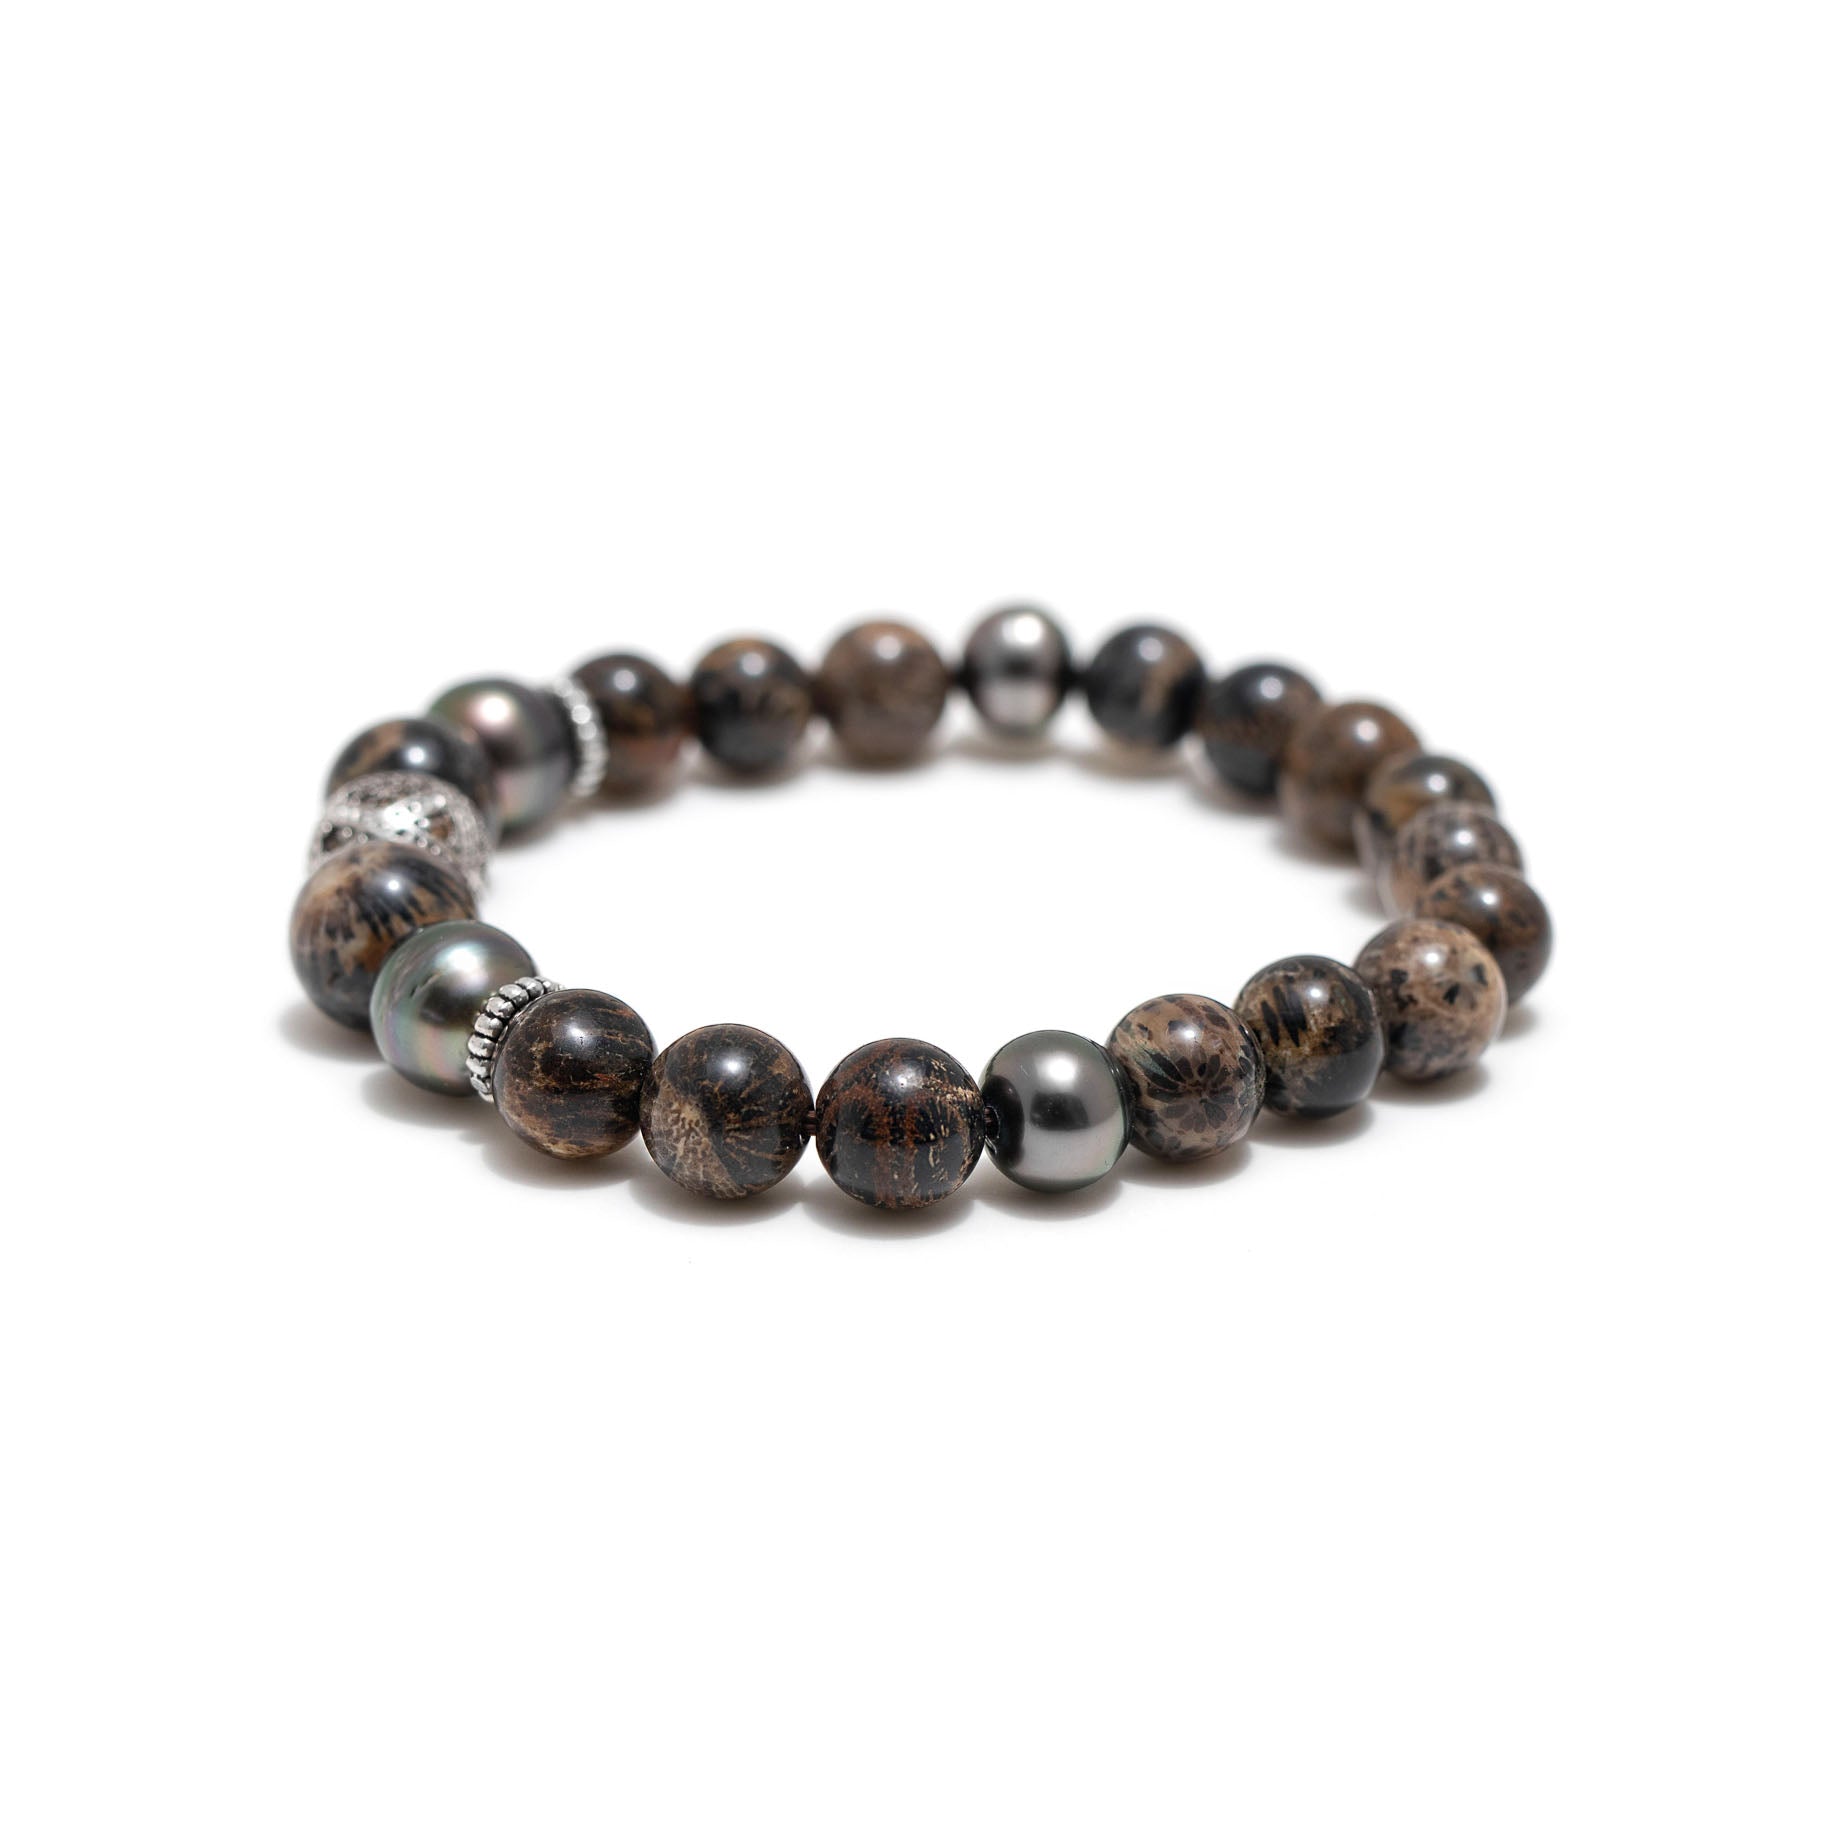 Beaded Silver Geometric Pattern Focal, 4 Tahitian Pearl & Rare Black Fossilized Coral Bracelet